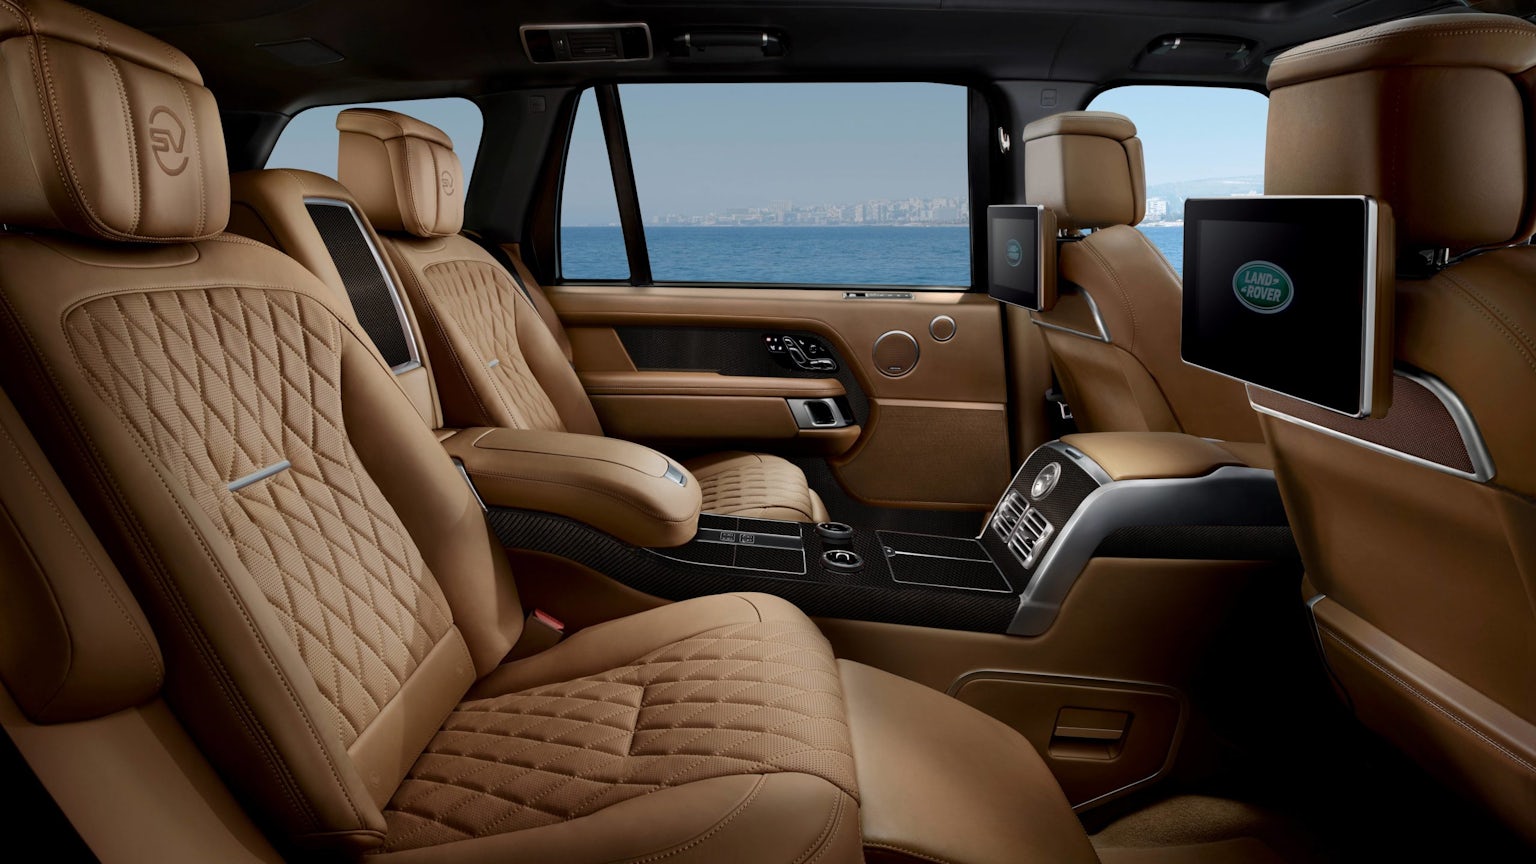 Range Rover SV Autobiography Ultimate revealed prices, specs and